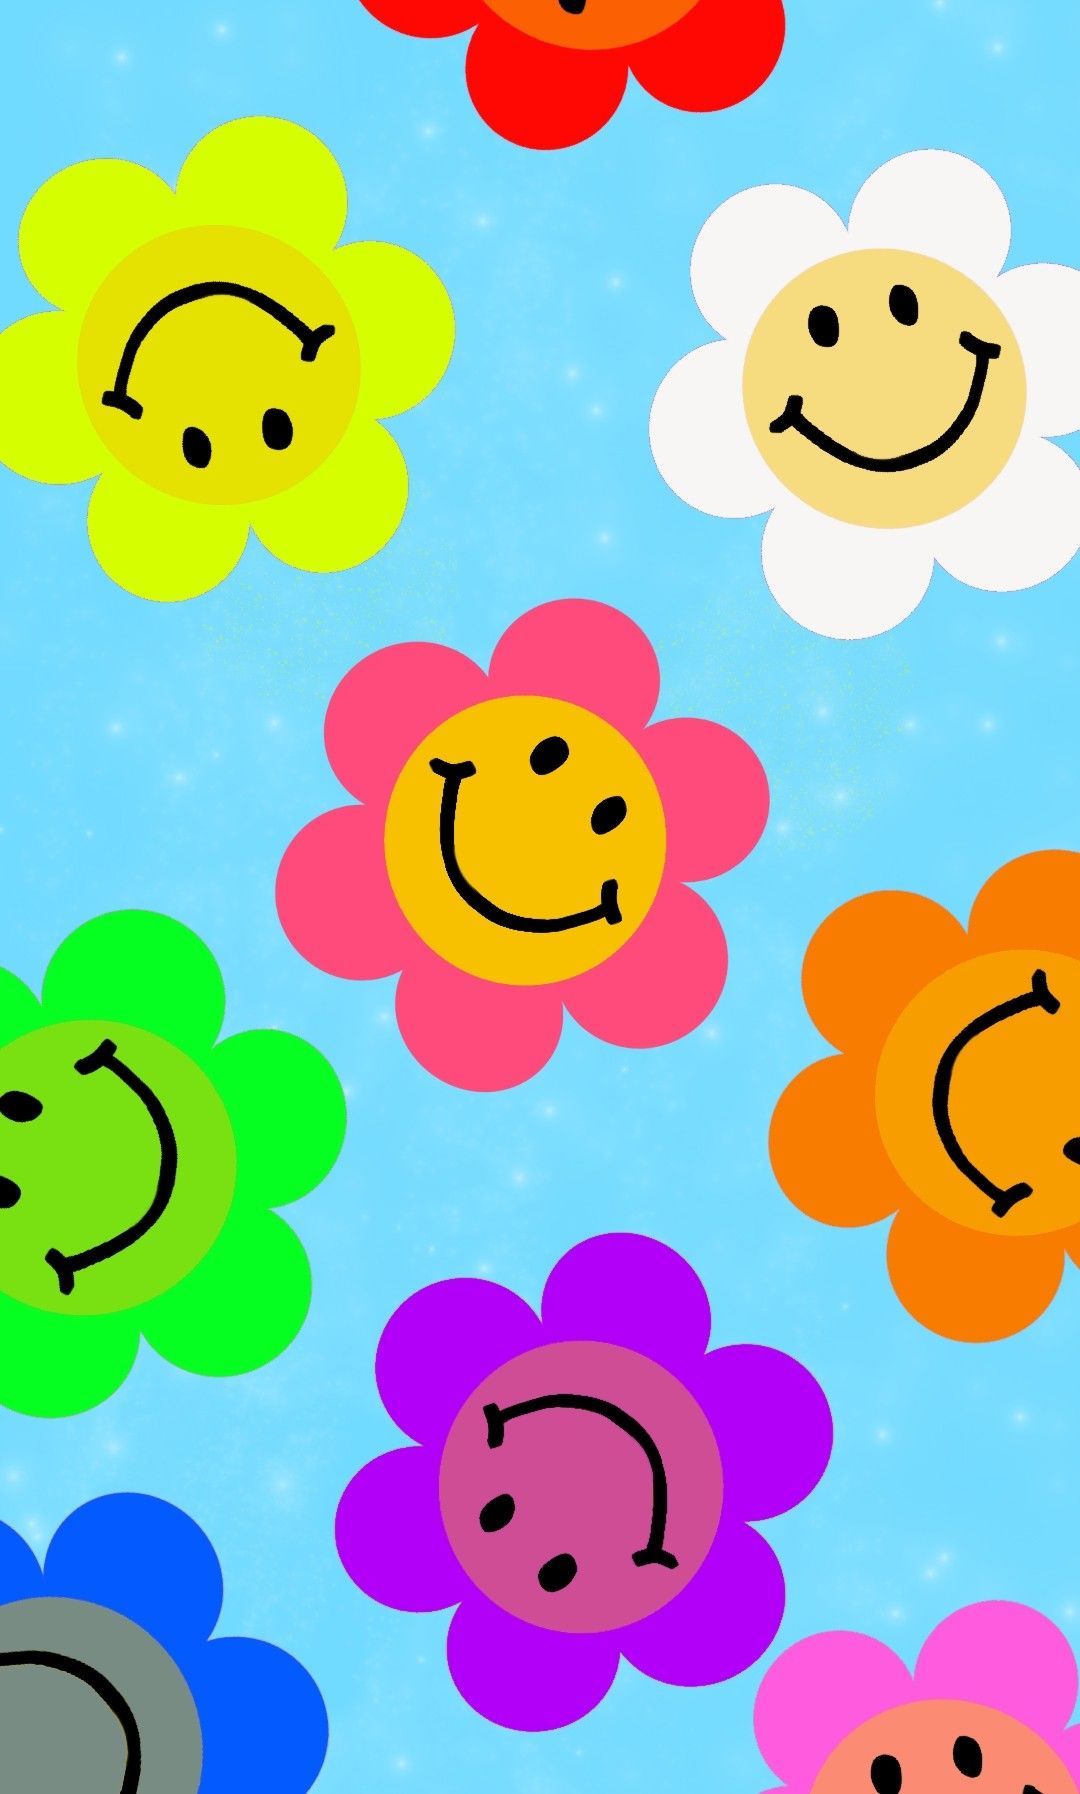 Indie kid wallpaper flowers withnout filter. Wallpaper iphone cute, Cute patterns wallpaper, Hippie wallpaper